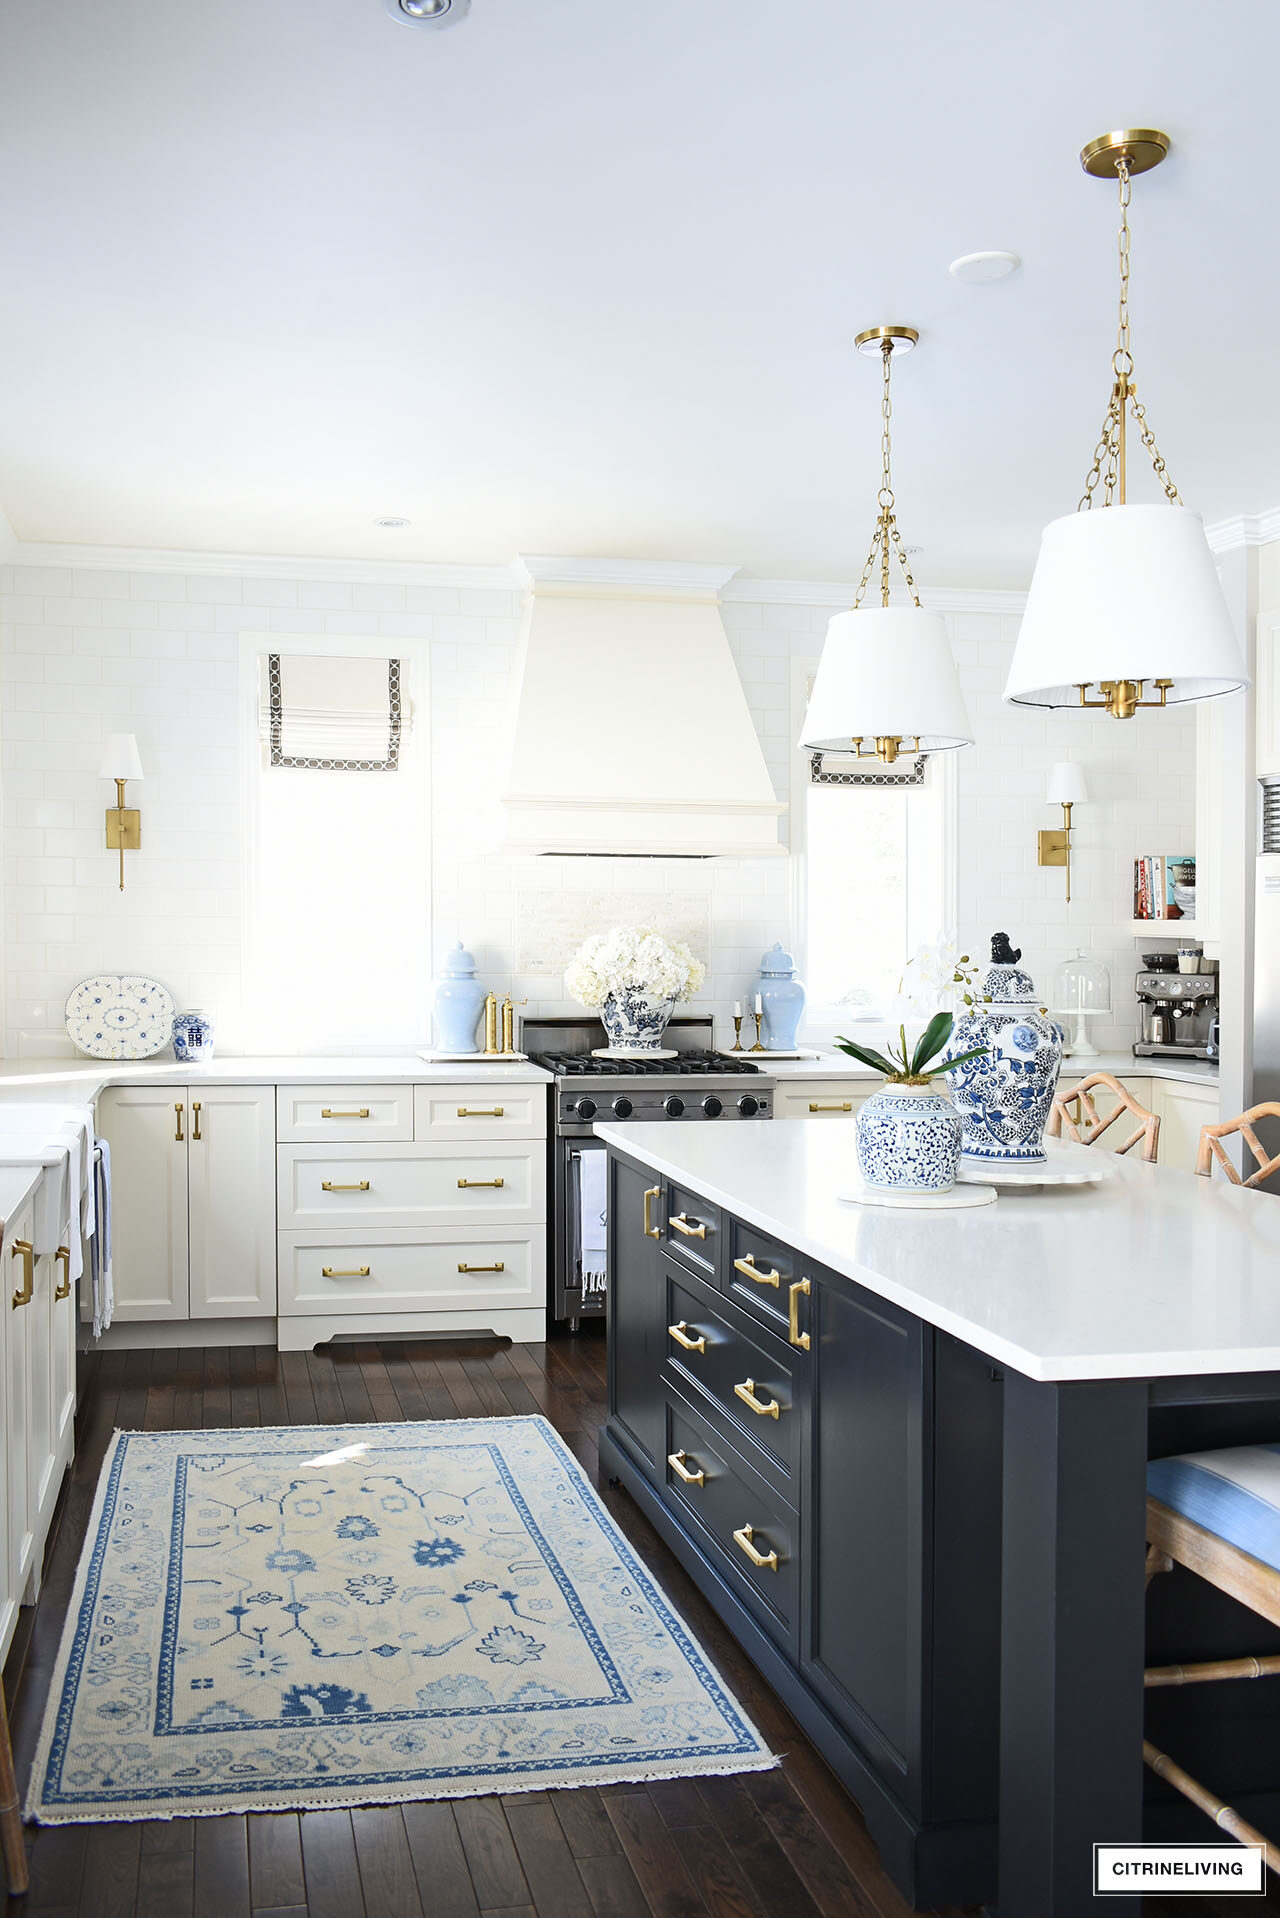 White and black kitchen decorated for spring with simple touches in blue and white, orchids, hydrangeas and ginger jars.